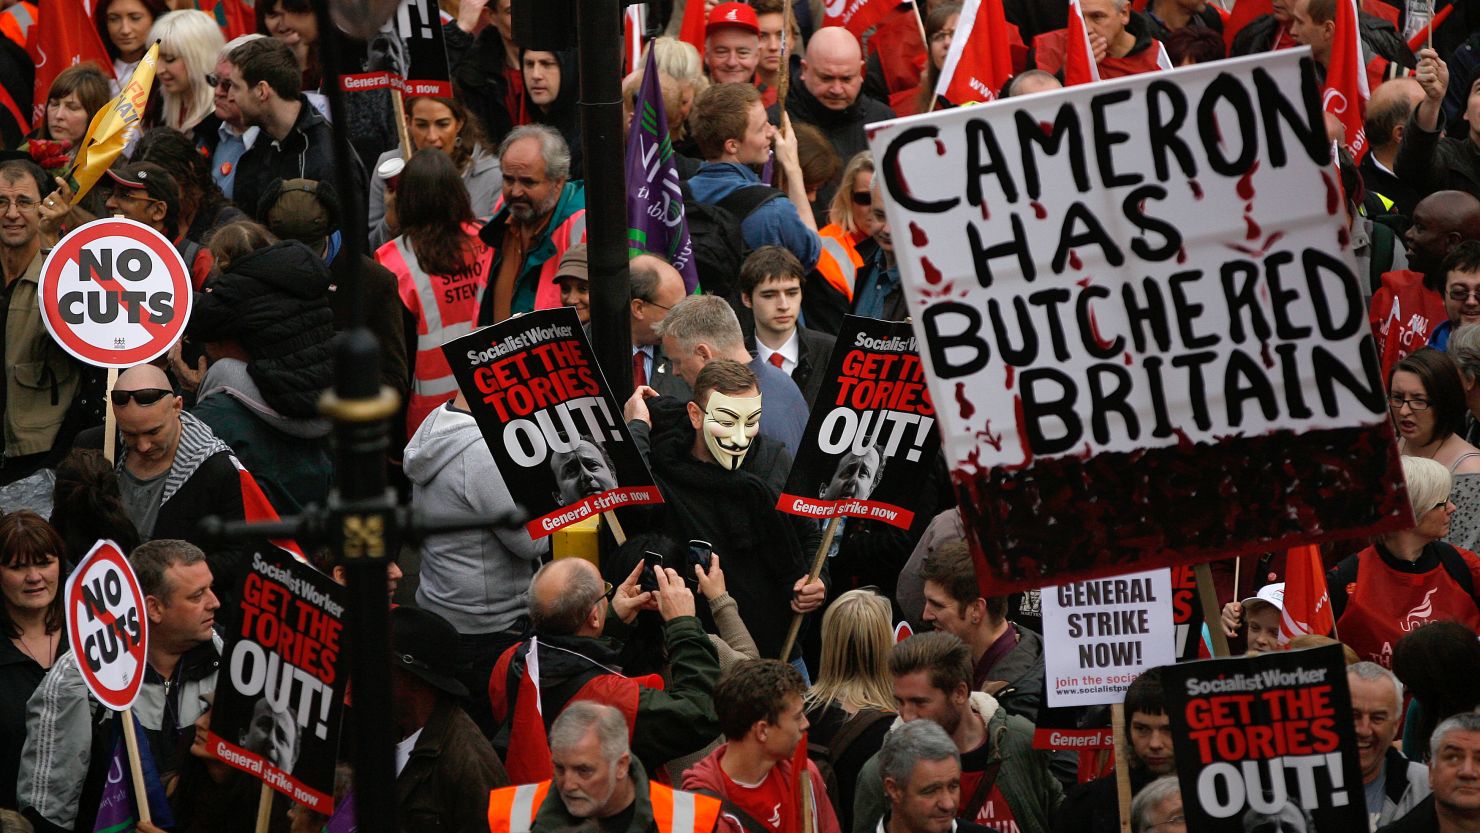 Demonstrators take part in a march in protest against the government's austerity measures on October 20, 2012 in London.